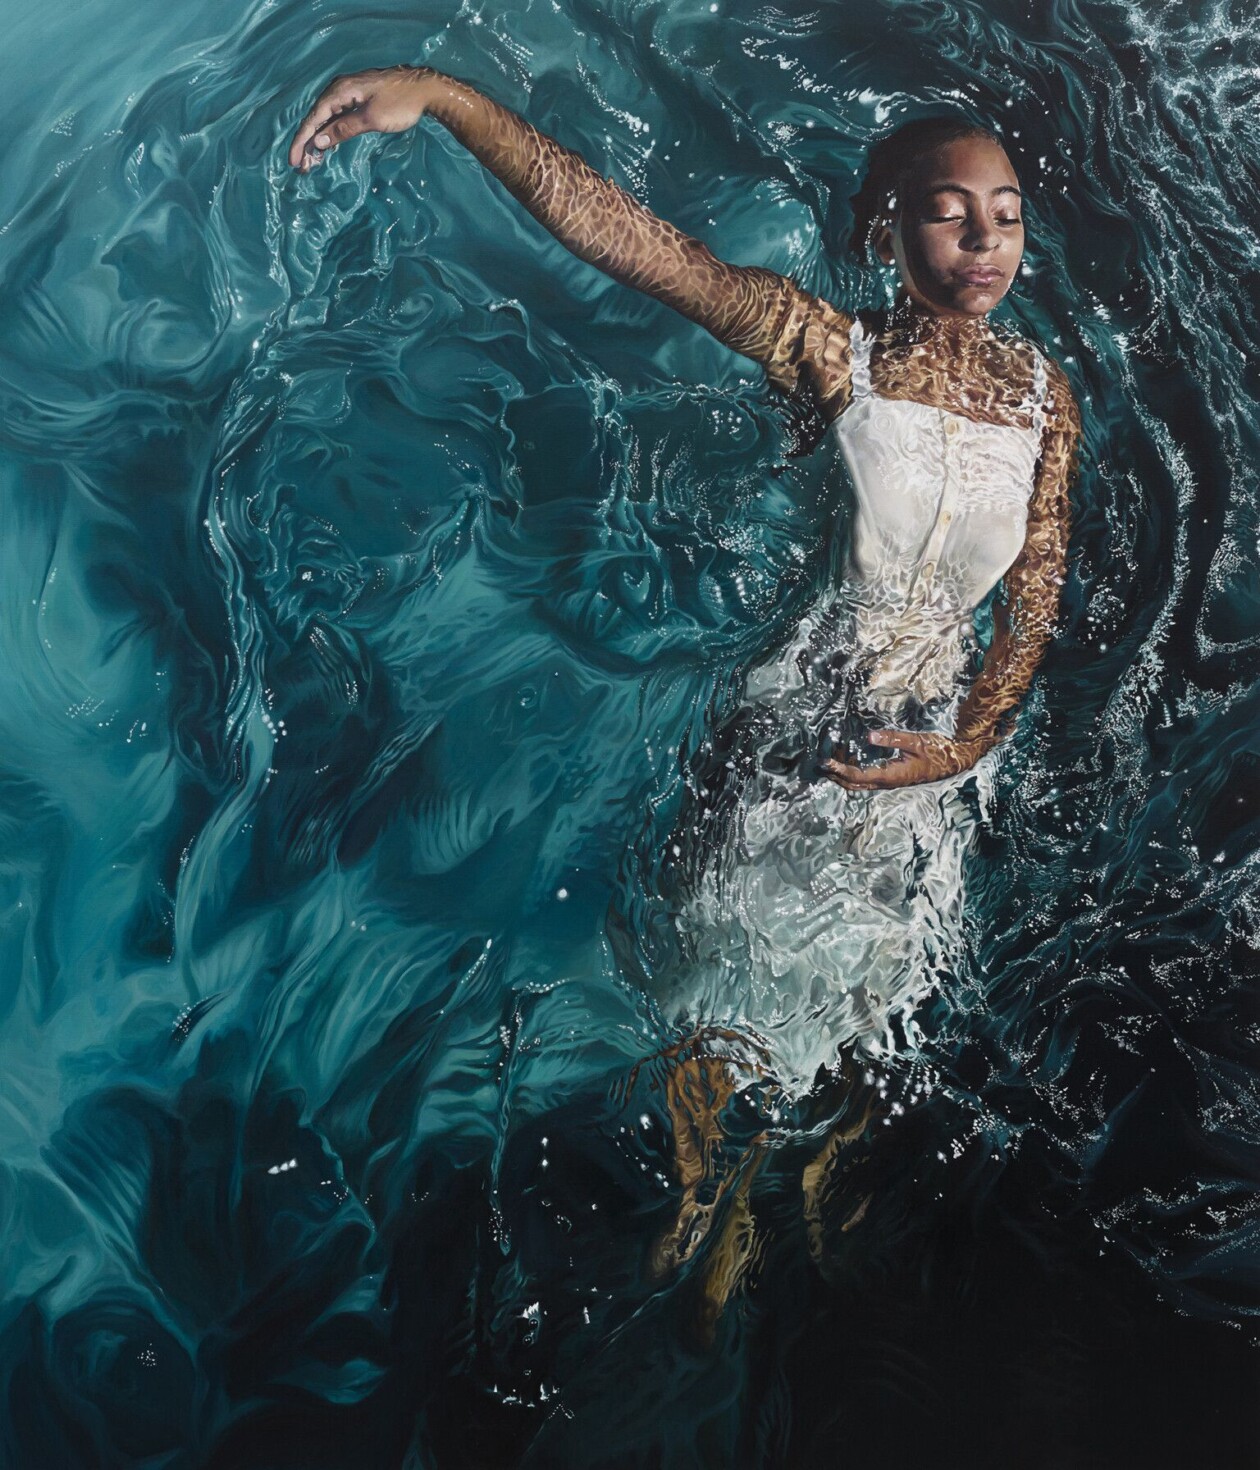 Photorealistic Paintings Of Contemplative And Serene Swimmers By Calida Rawles (7)